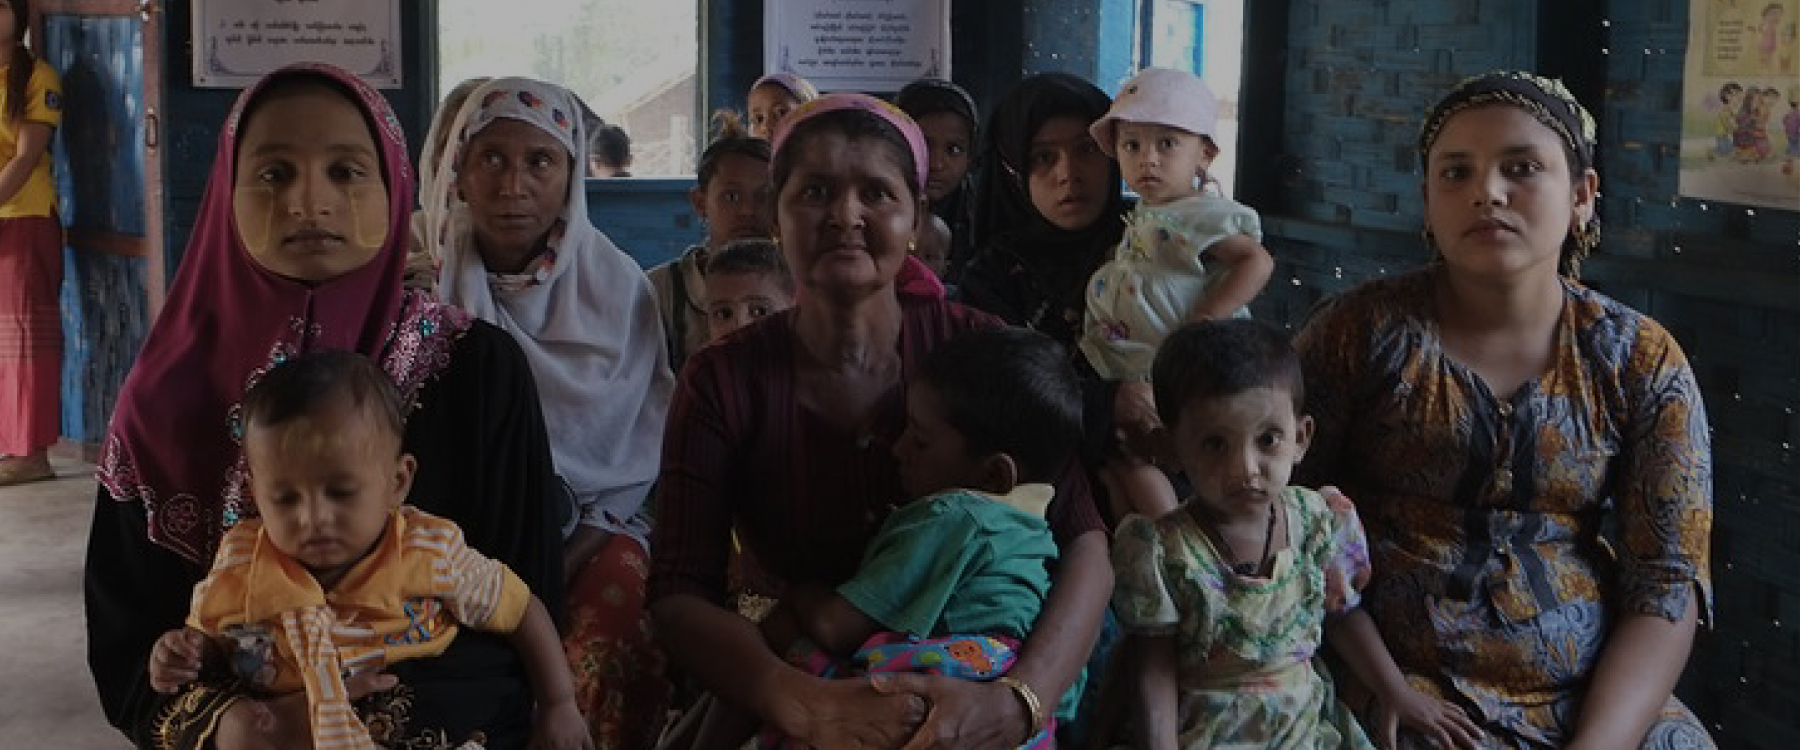 Seated women wearing head scarves and with children on their knees stare unsmiling at the camera. They are in a waiting room.